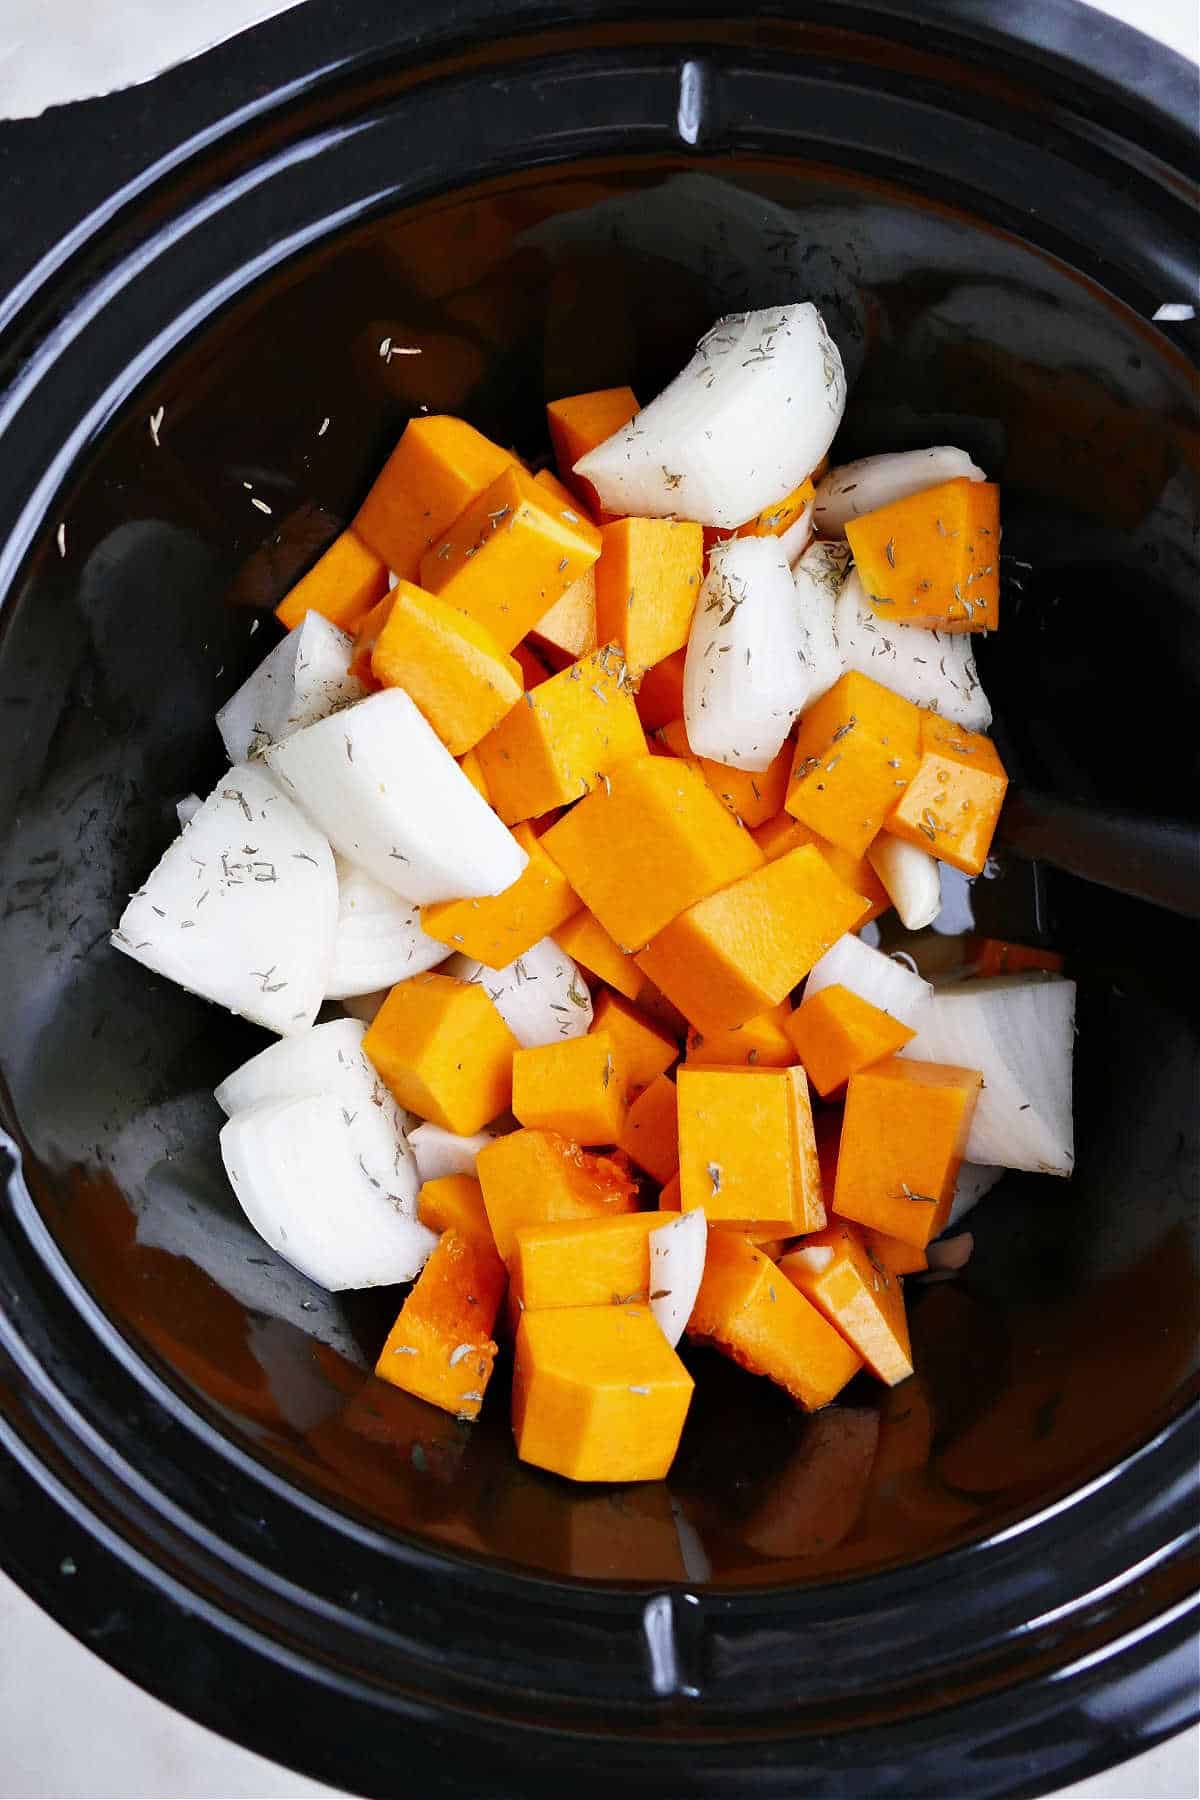 cubed butternut squash and chopped onions in a crockpot